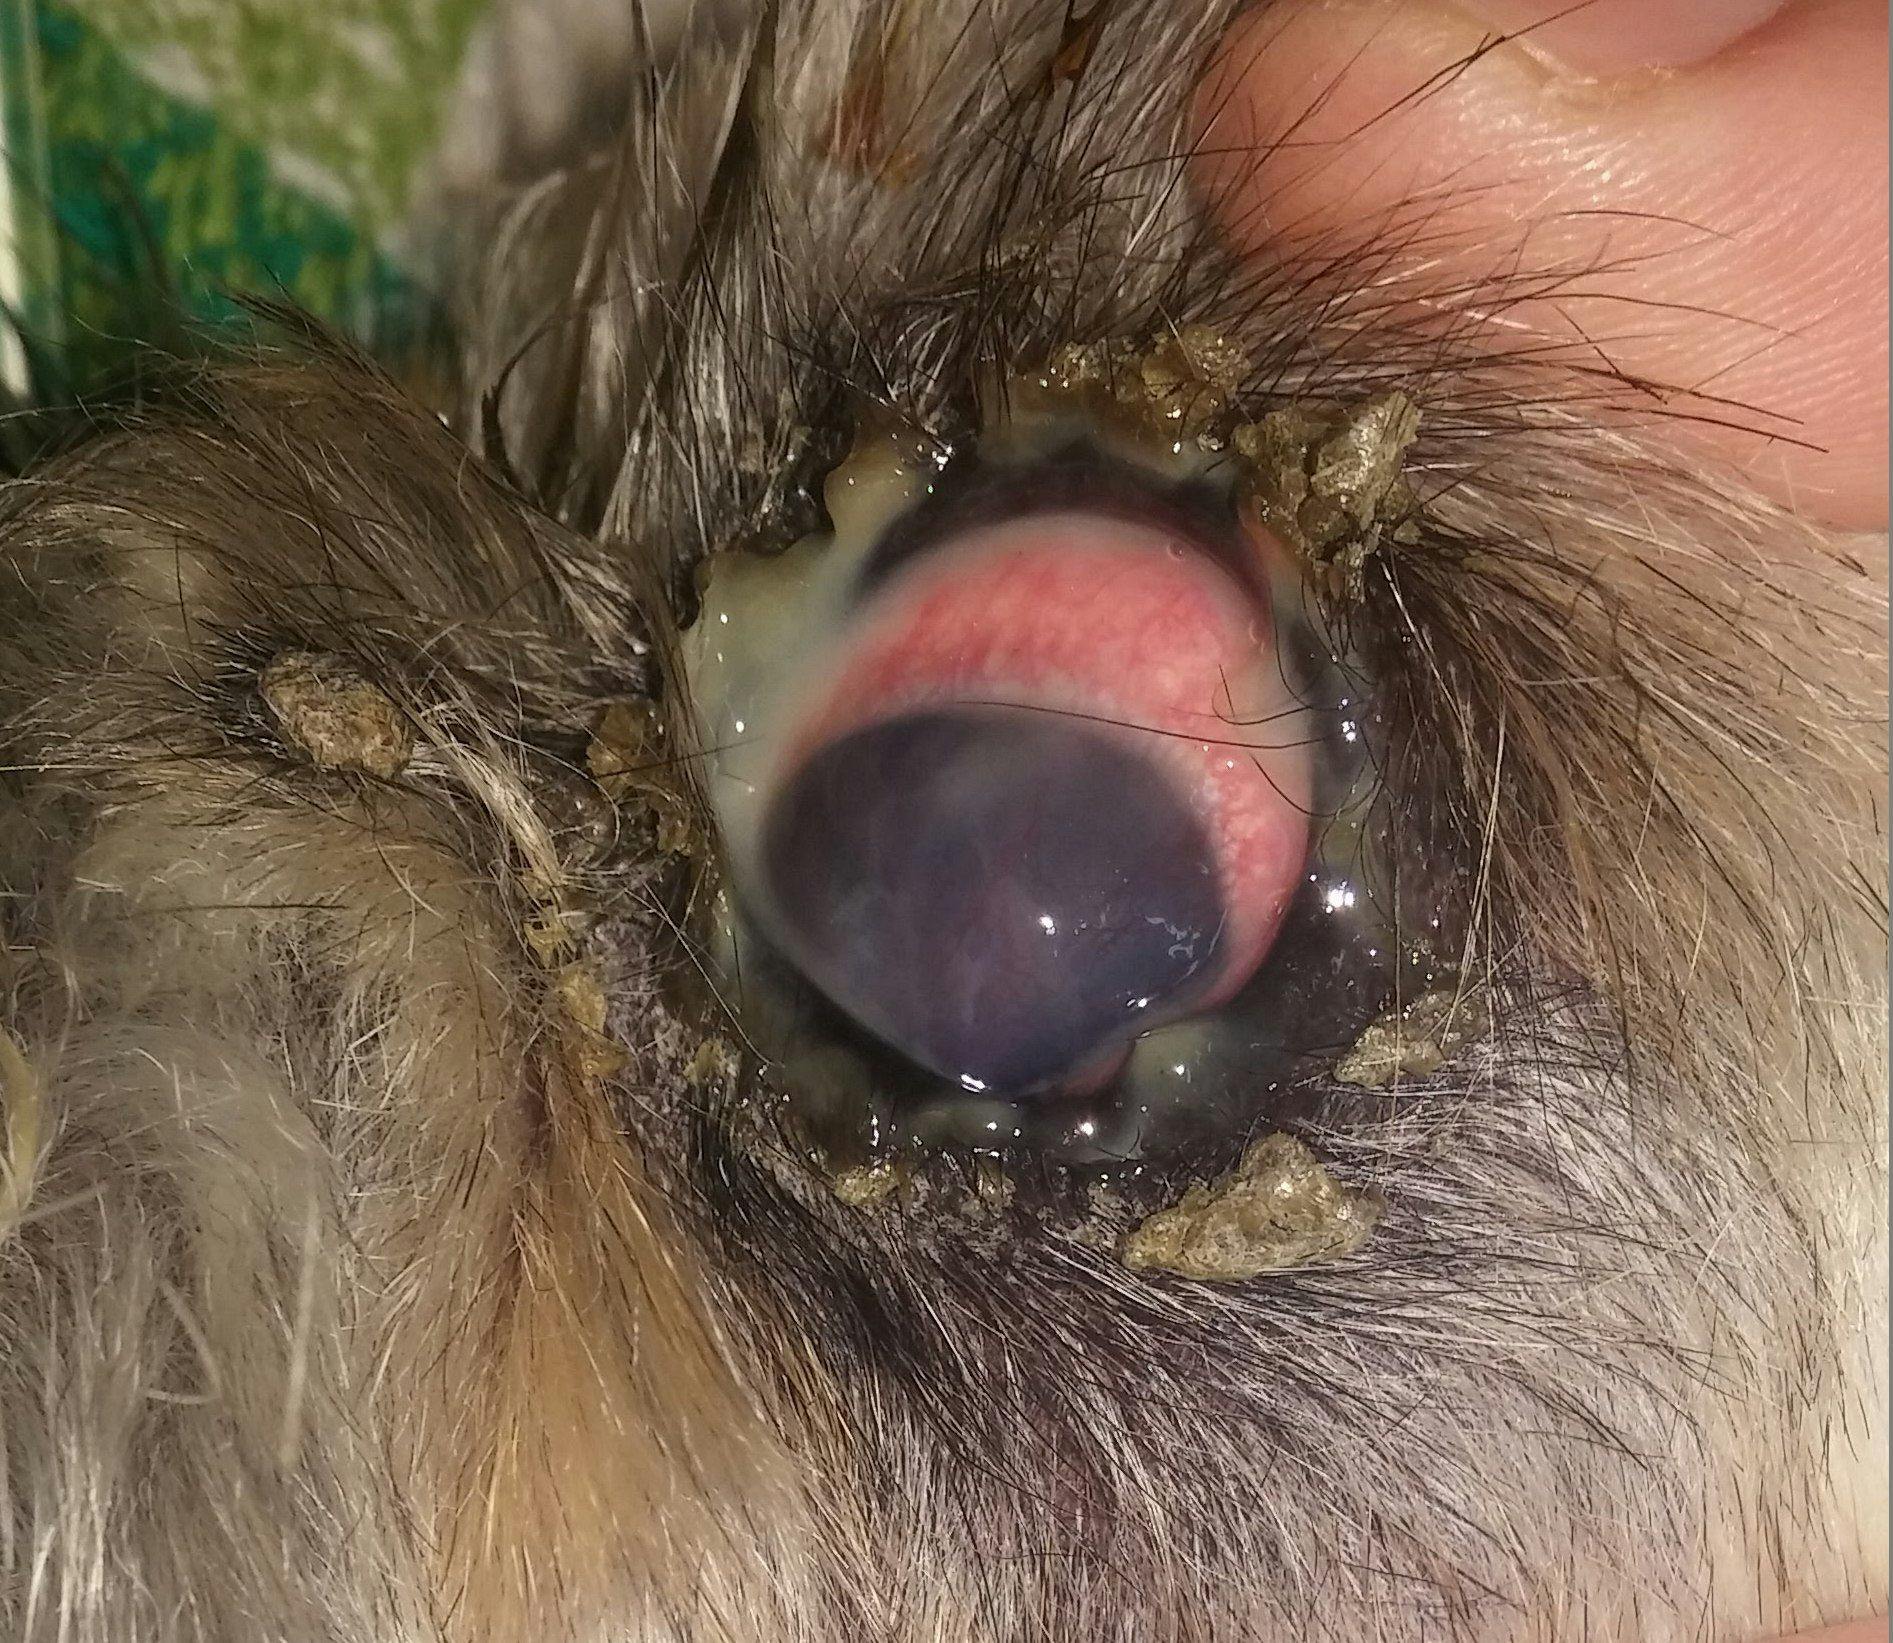 Figure 2. Purulent discharge and conjunctival hyperemia are evident in this dog with KCS. The cornea is totally opaque due to pigmentation, cellular infiltration, fibrosis, and vascularization, rendering this eye blind.